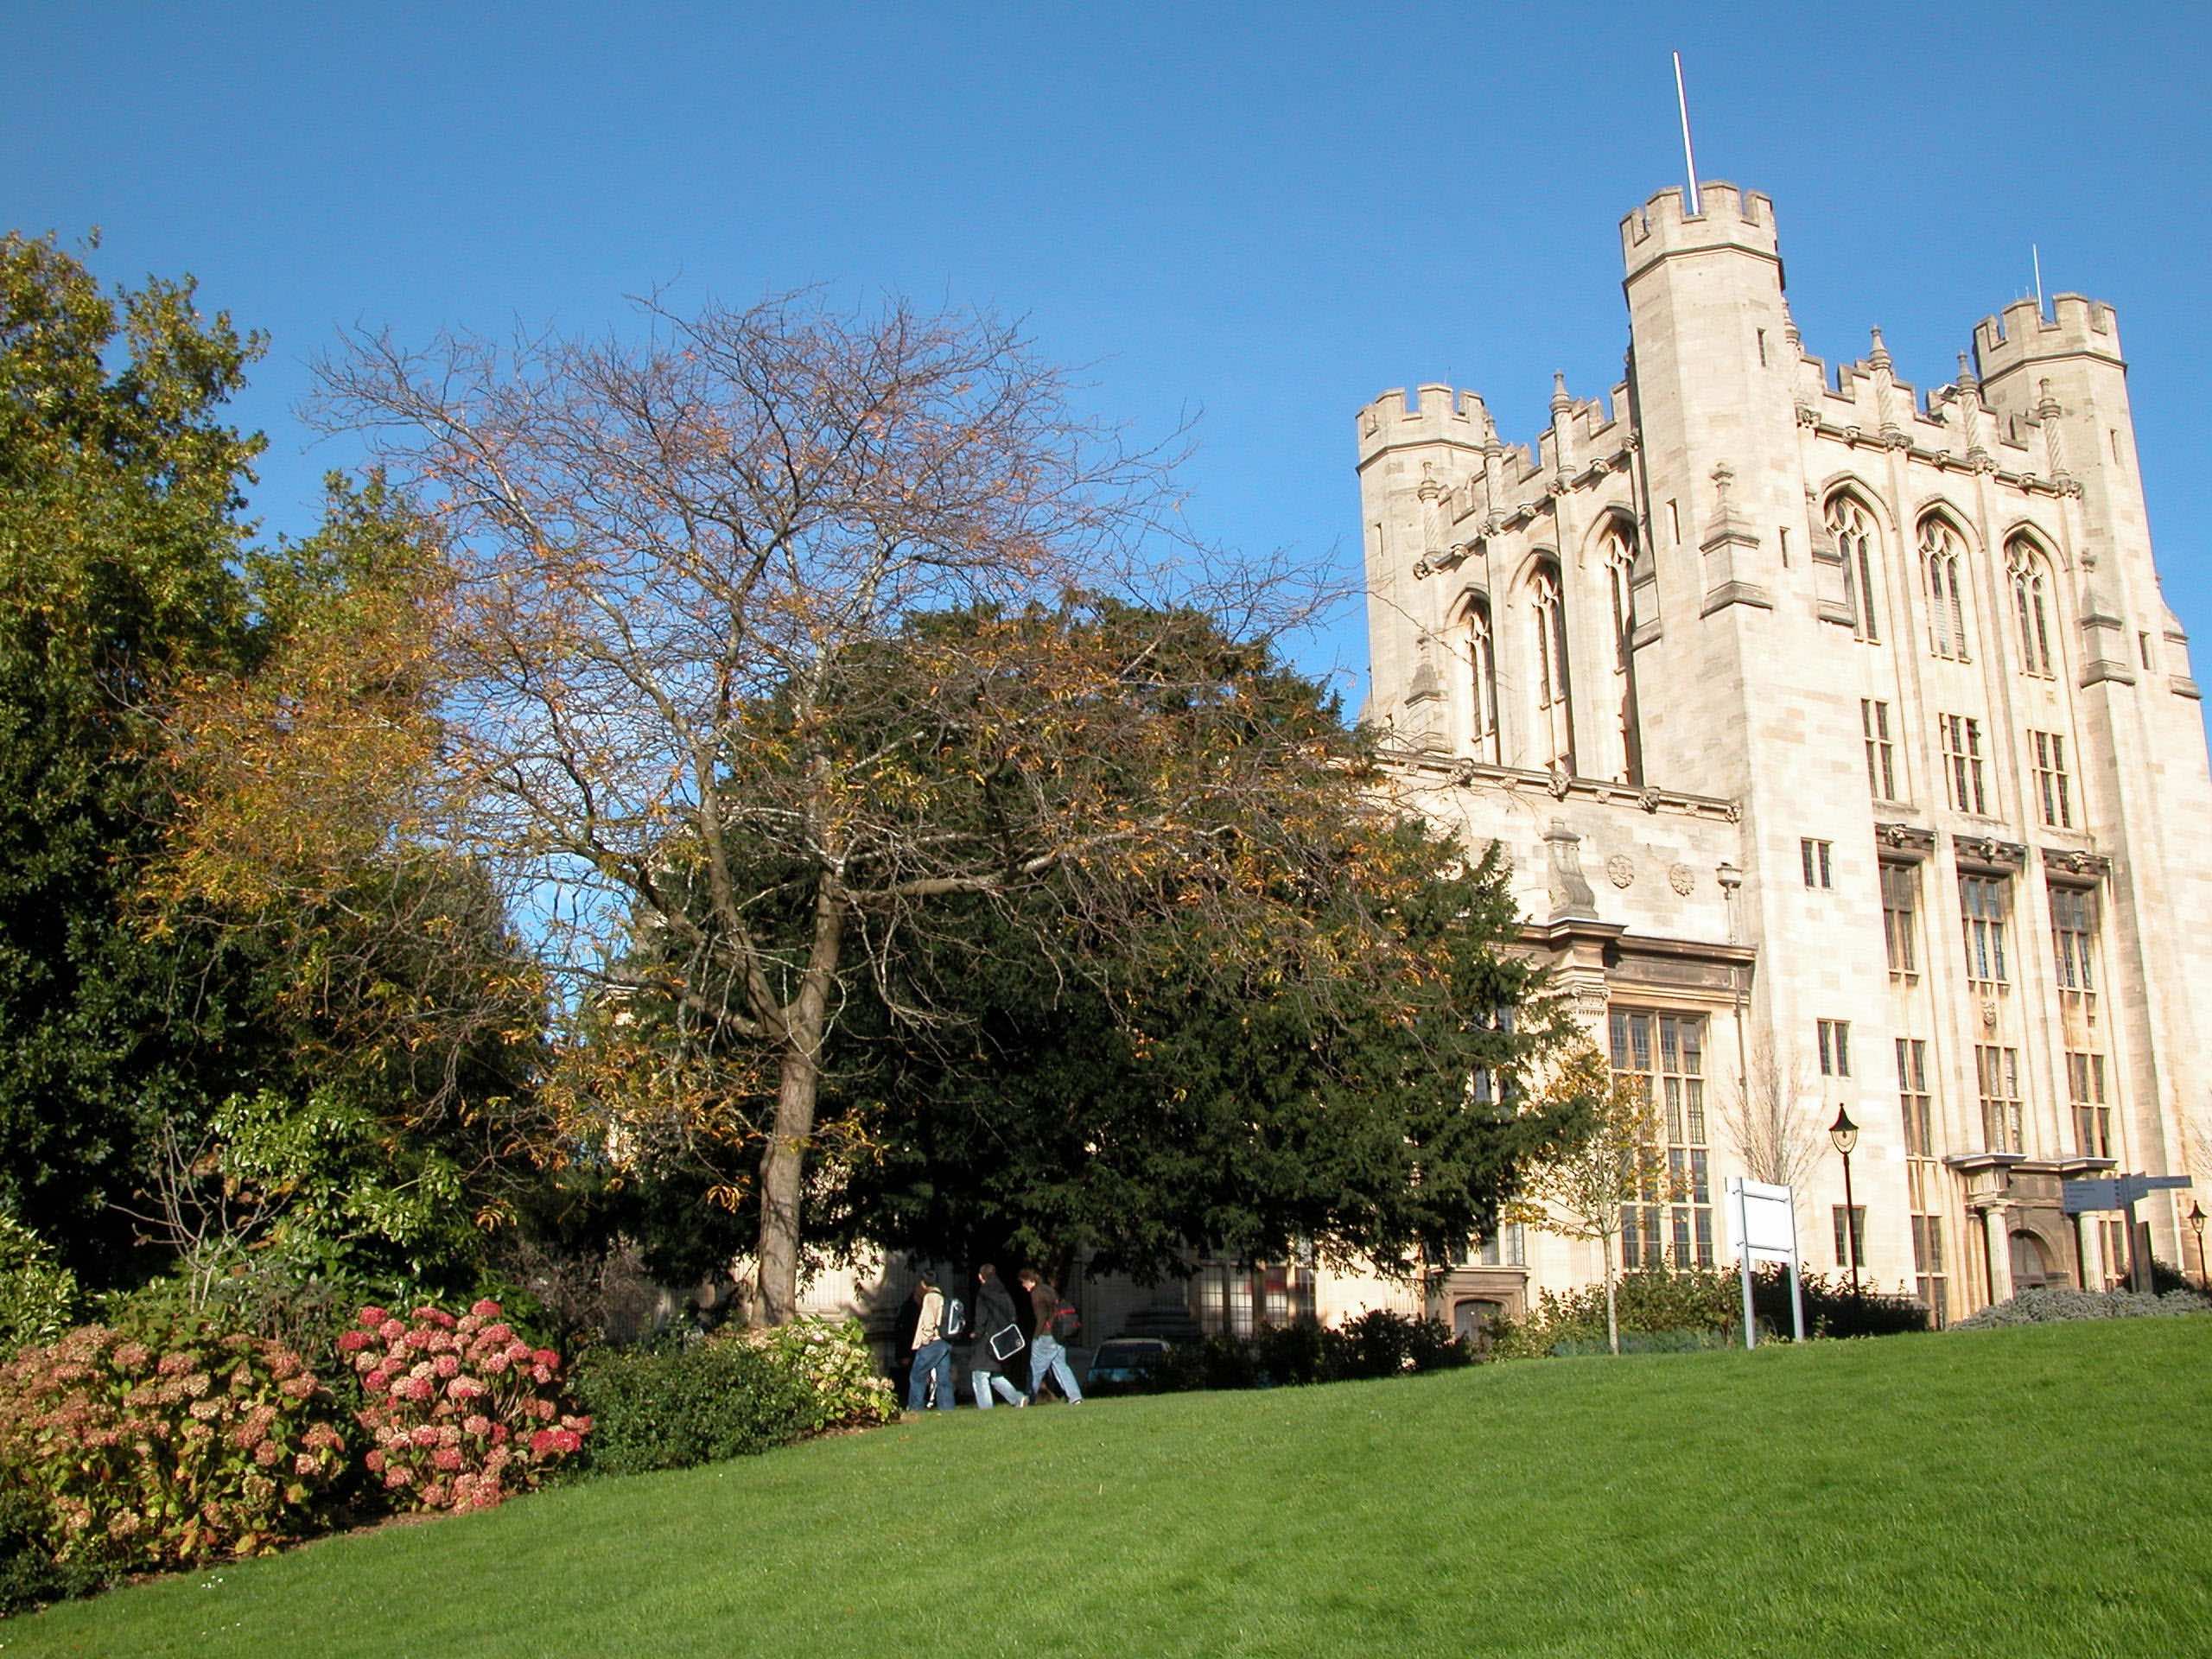 A view of the physics building and grounds at the University of Bristol in Bristol, England. Photo credit: University of Bristol